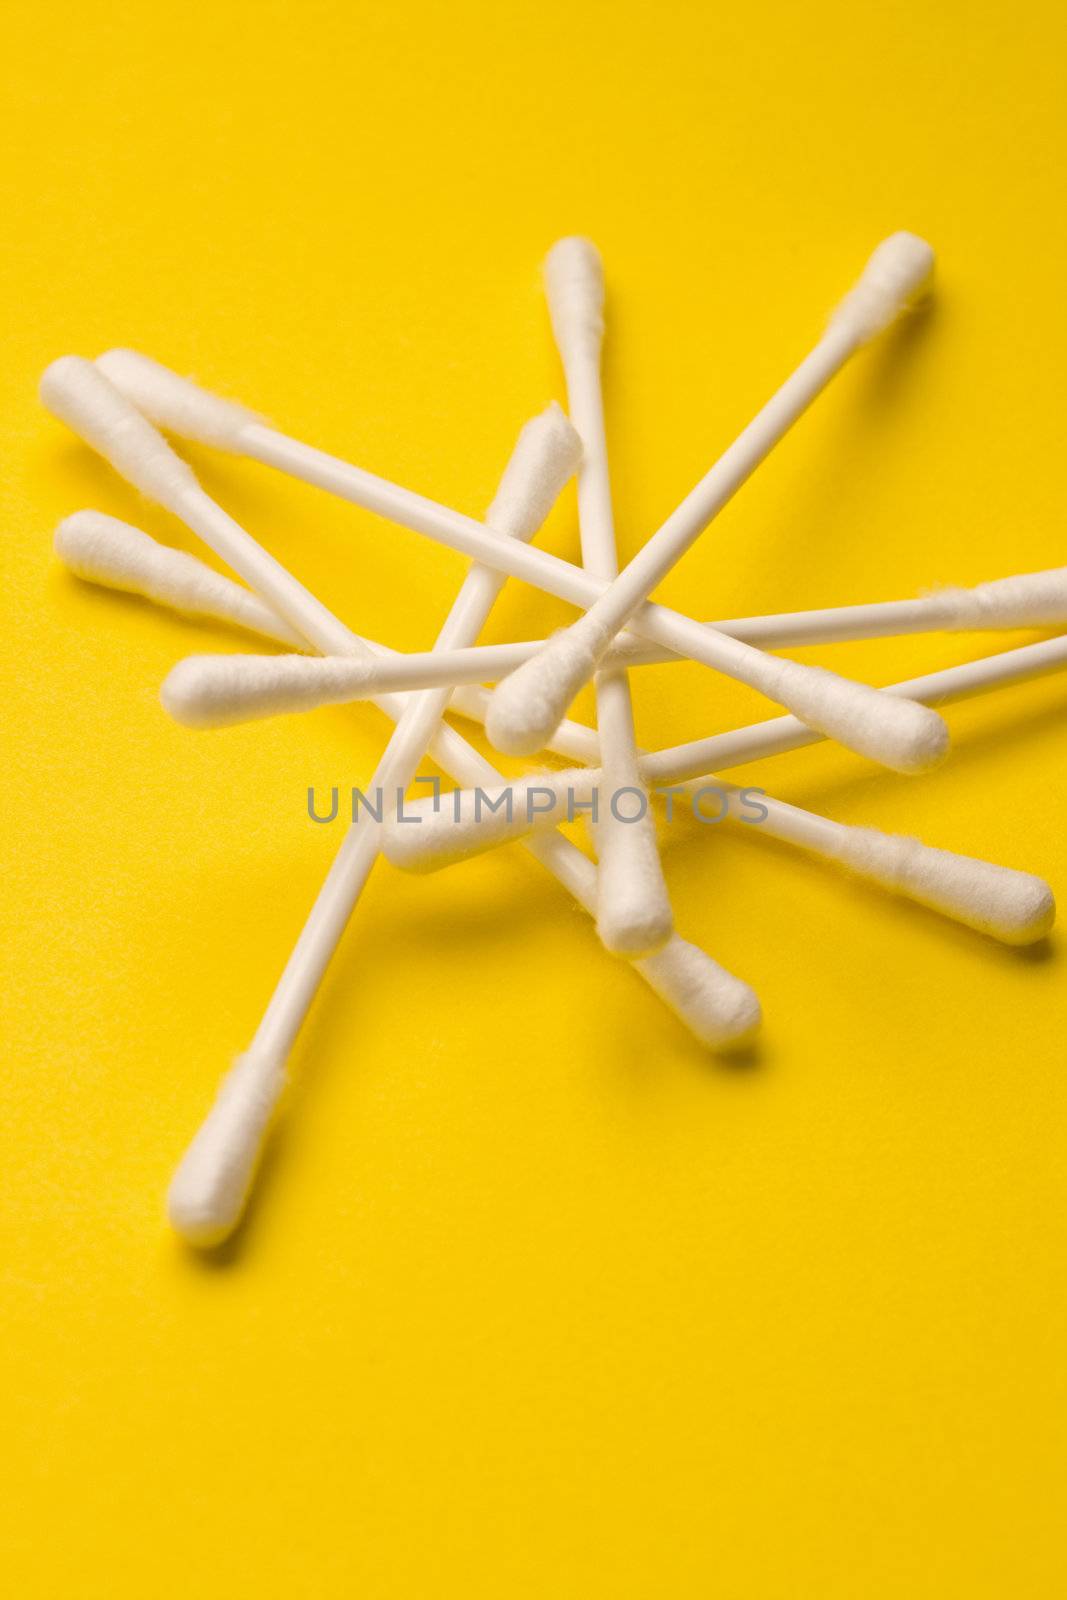 Cotton swabs isolated on yellow background